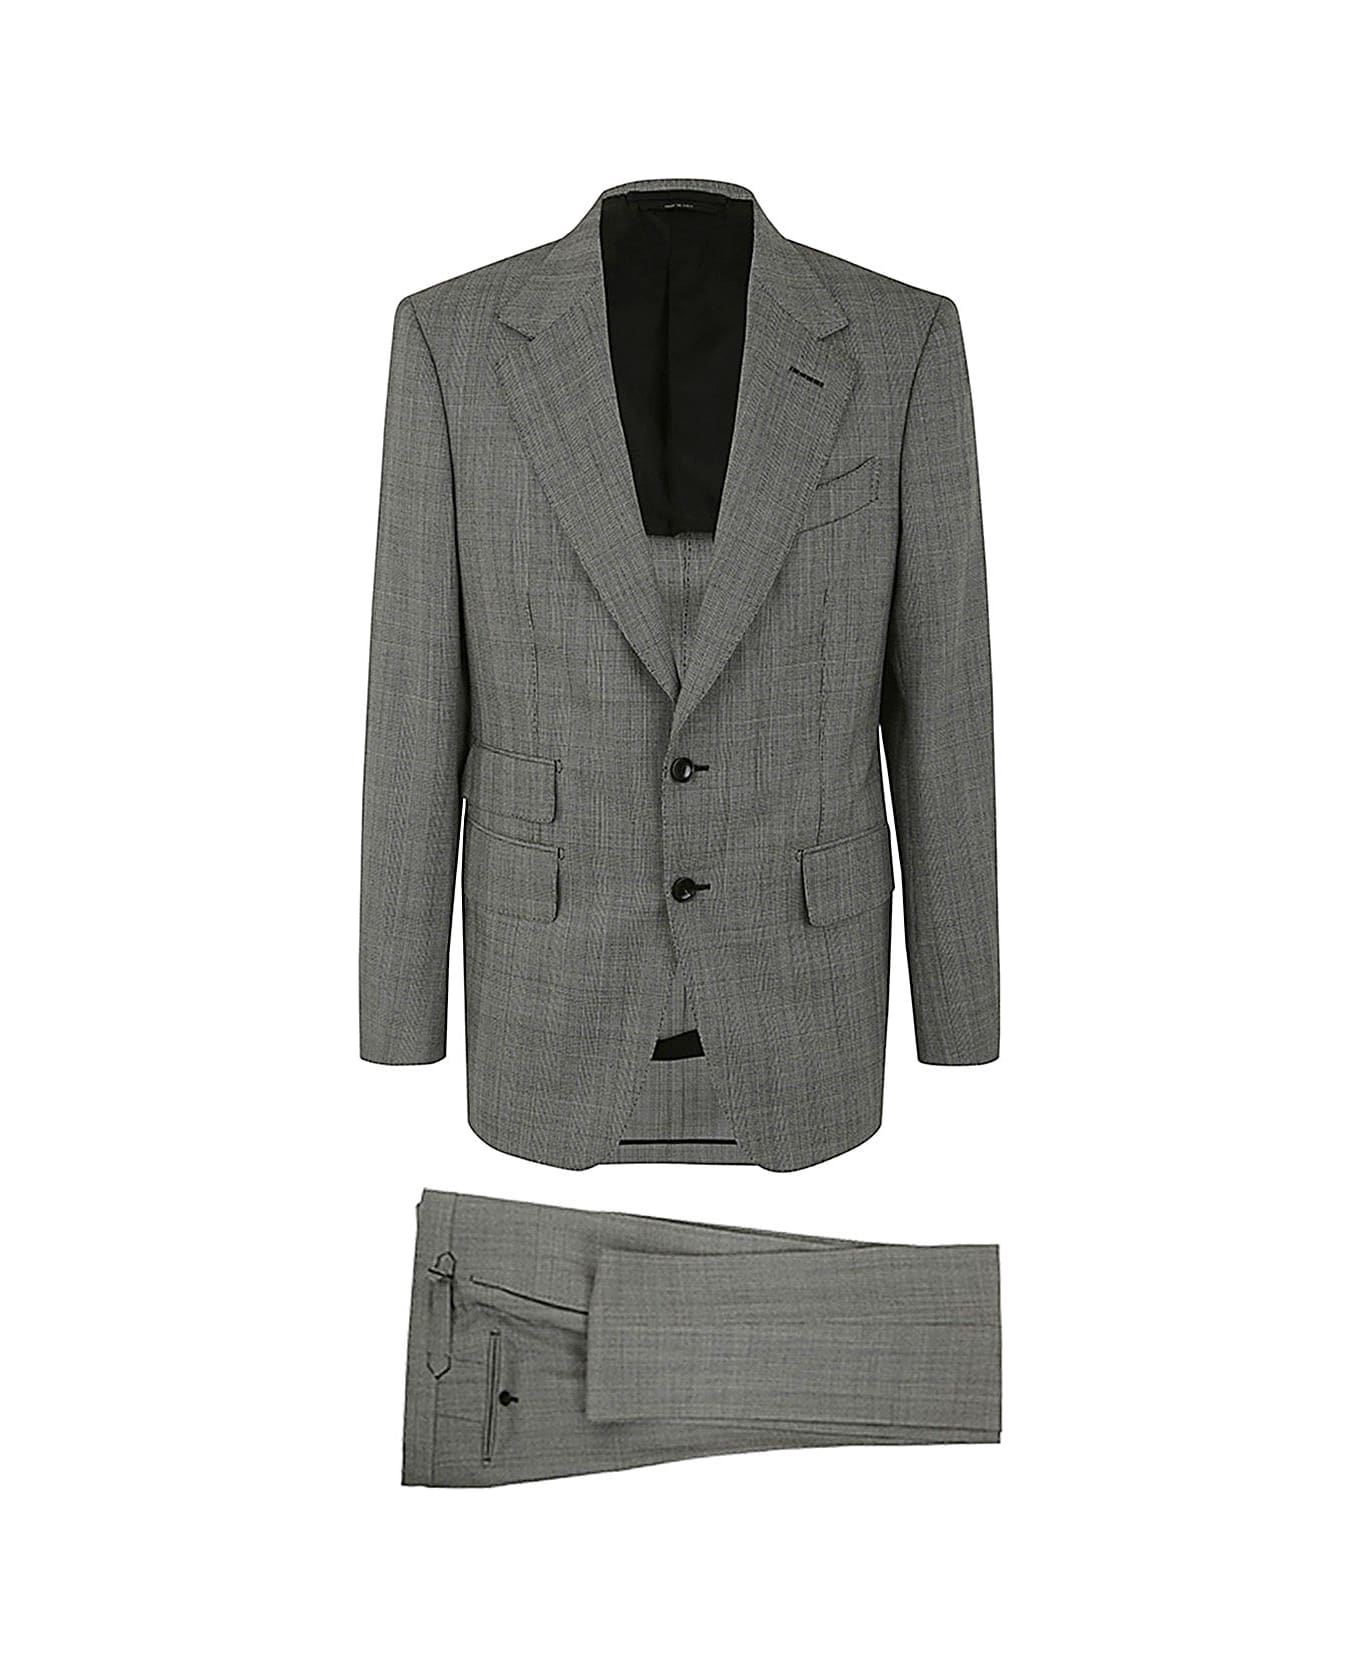 Tom Ford Single Breasted Suit - Zawbl Combo White Black スーツ